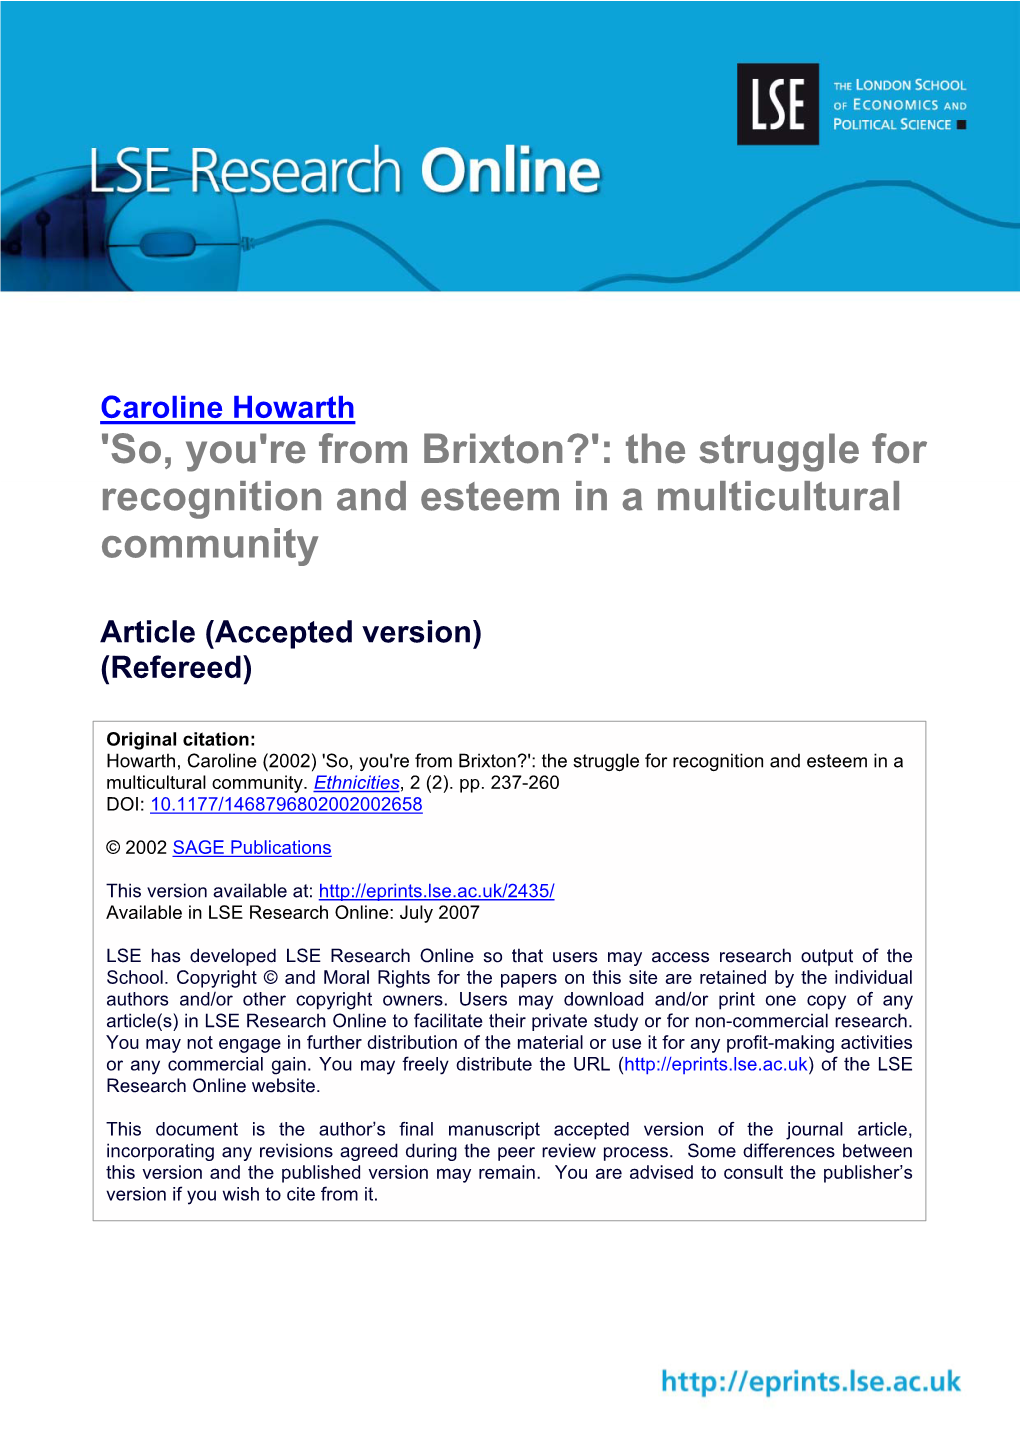 Re from Brixton?': the Struggle for Recognition and Esteem in a Multicultural Community